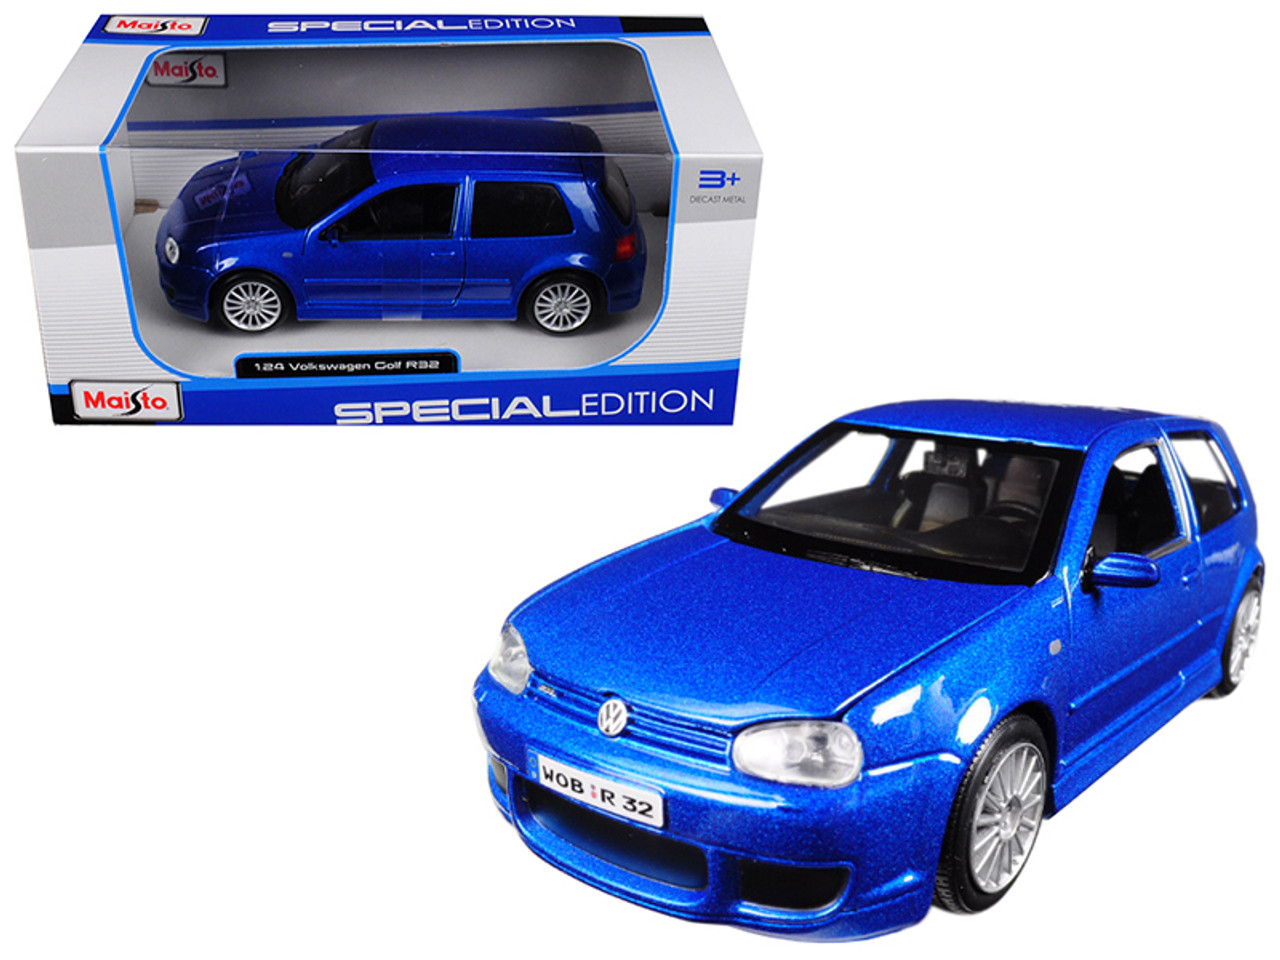 Maisto 1:24 Volkswagen VW Golf R32 Alloy Car Diecasts & Toy Vehicles Car  Model Miniature Scale Model Car Toy For Children